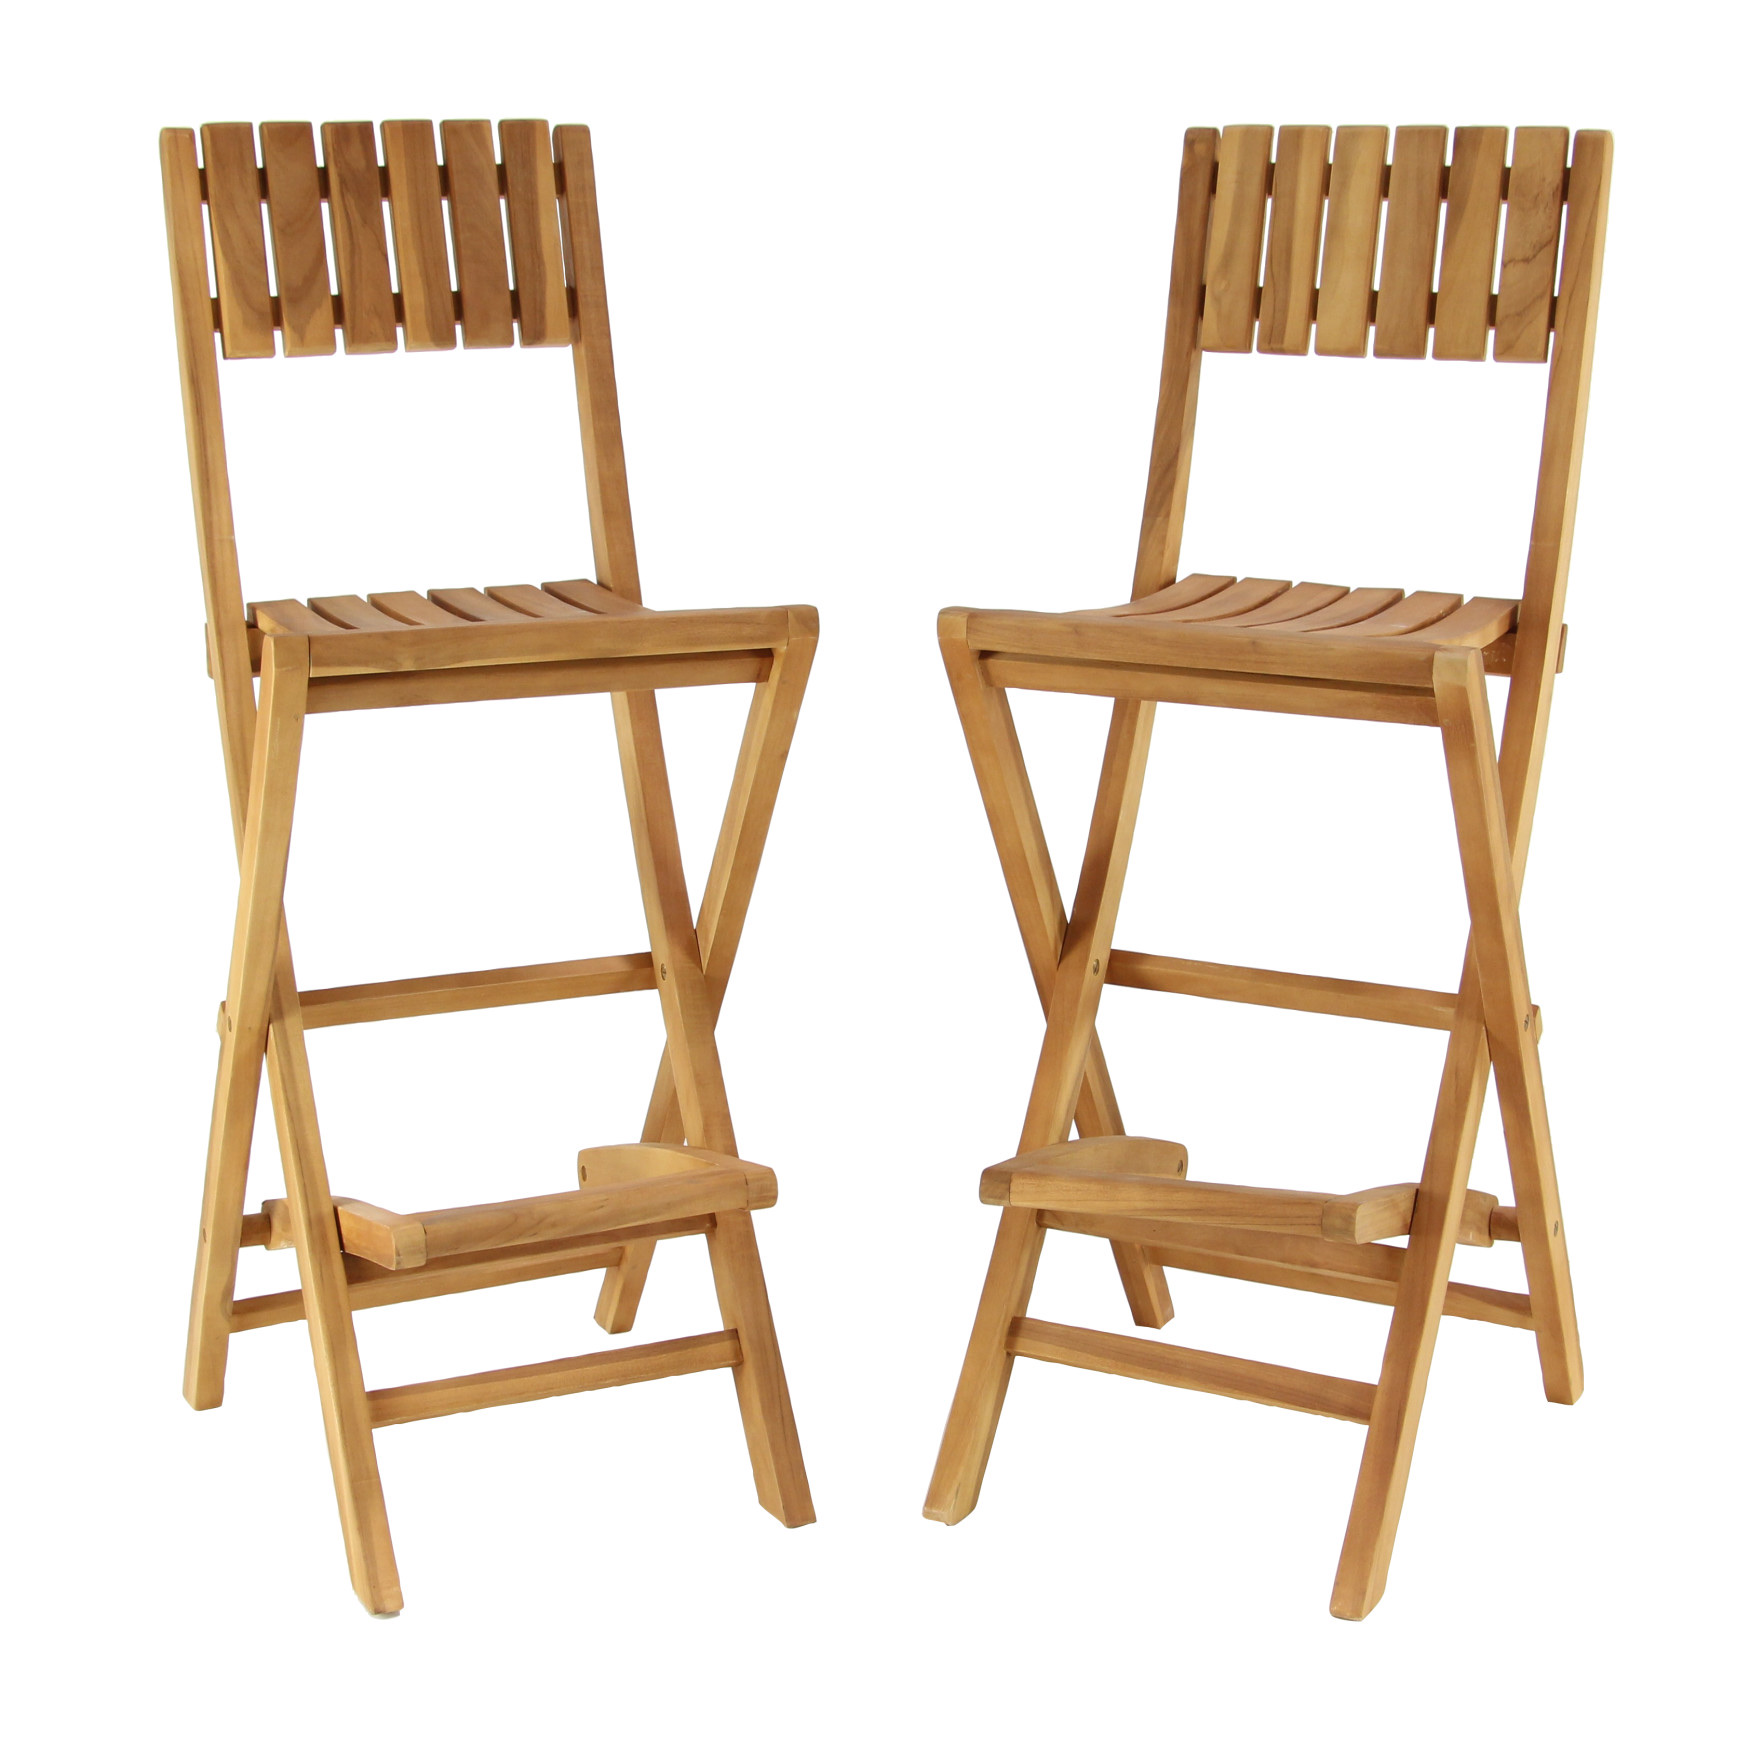 Wooden Foldable Bar Table and Stools Set Garden Furniture Bar Stools Set of 2